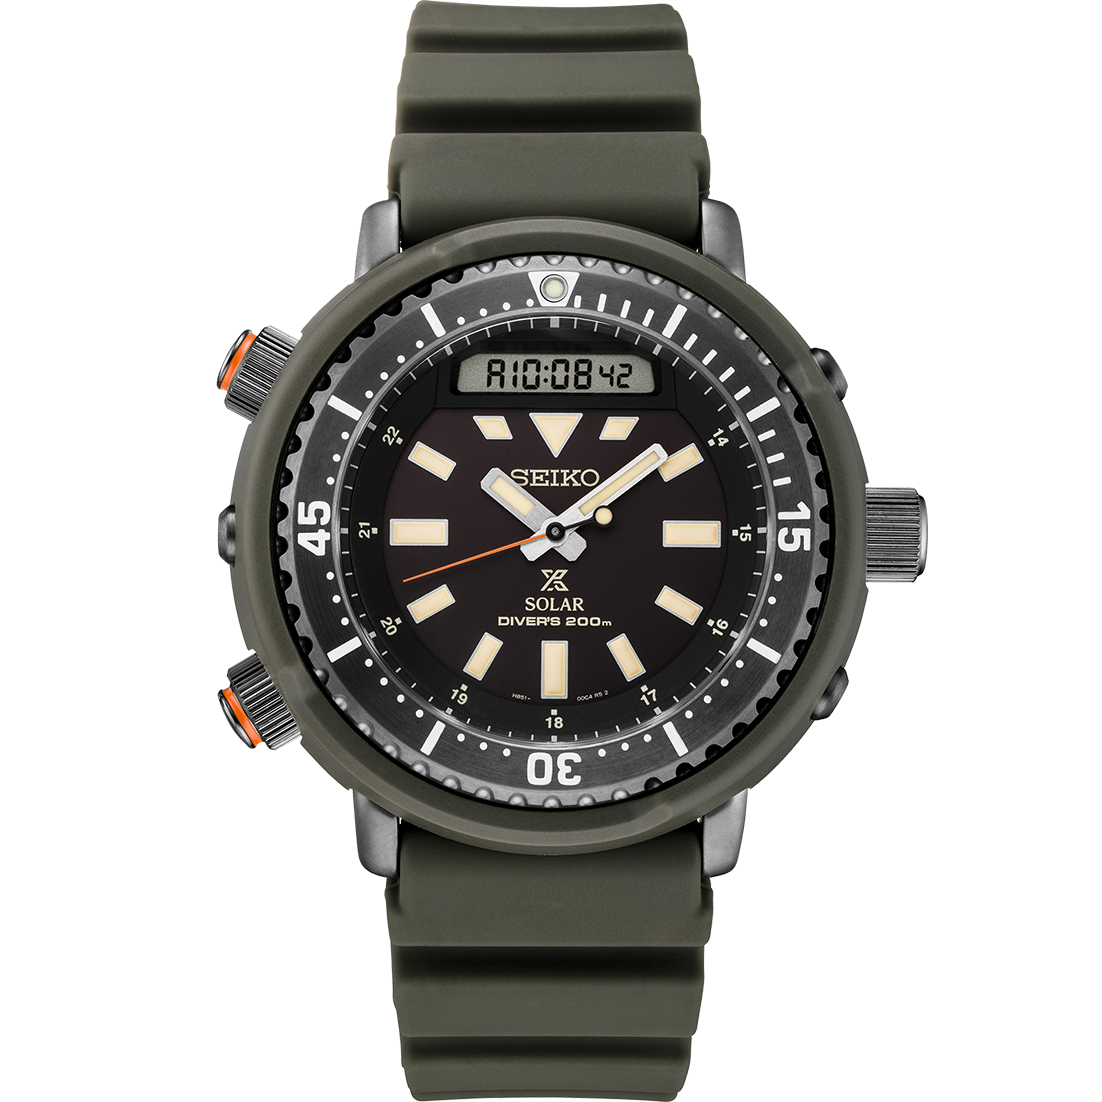 Seiko Prospex Stainless Steel (Hard Coating) And Plastic Solar Divers 200M Watch
Name Of Bracelet: Green Silicone
Clasp: Buckle
Hardlex Crystal
Dial Color: Black Lumibrite On Hands, Indexs And Bezel
Bezel: Slate Unidirectional Rotating Bezel
MM: 47.